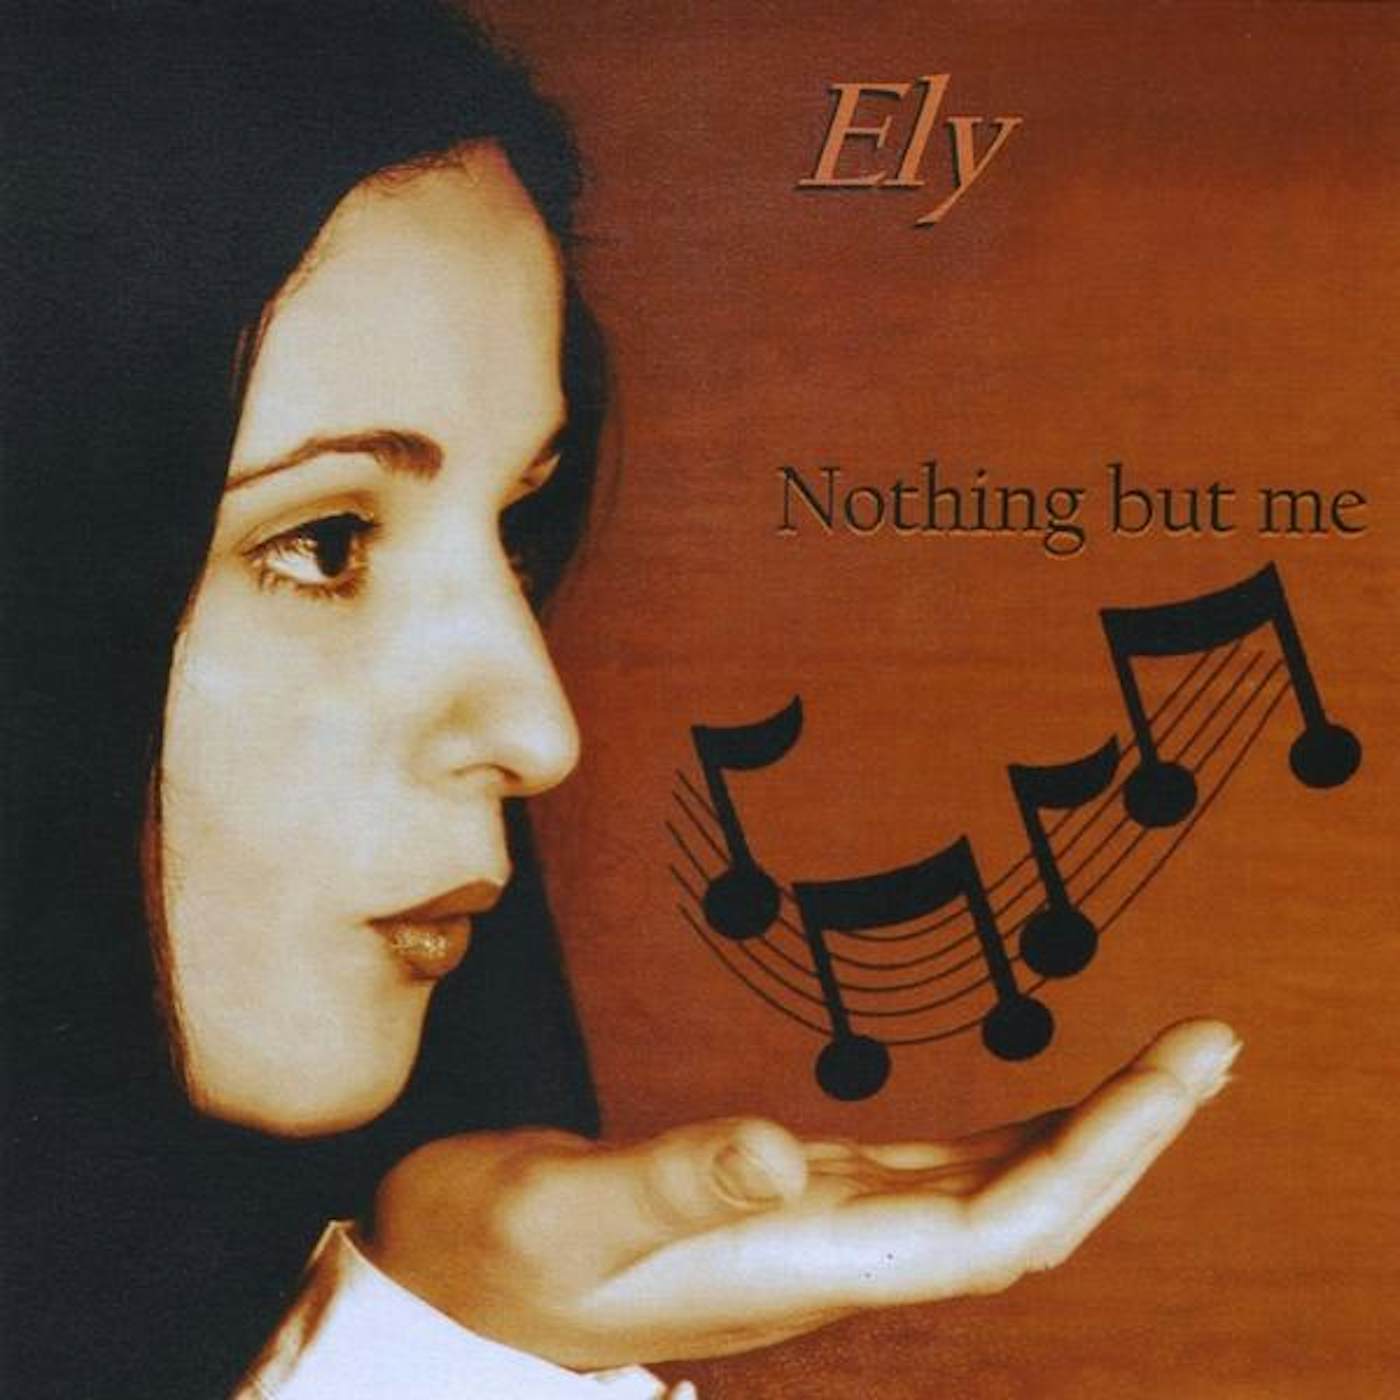 Ely NOTHING BUT ME CD